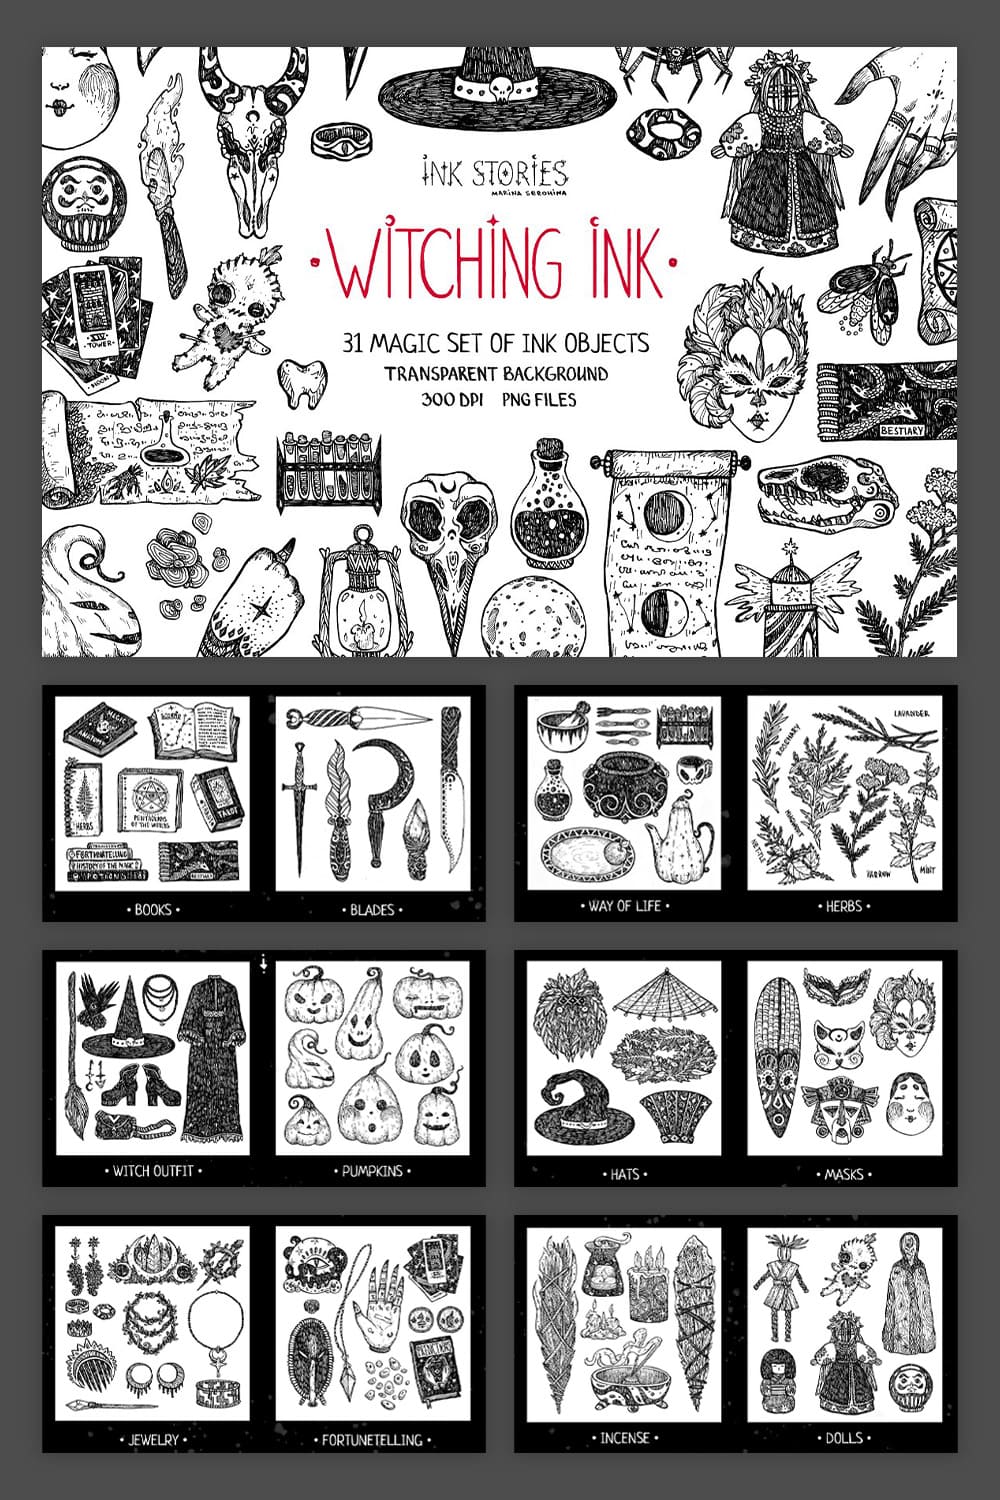 Witching Ink pinterest image.